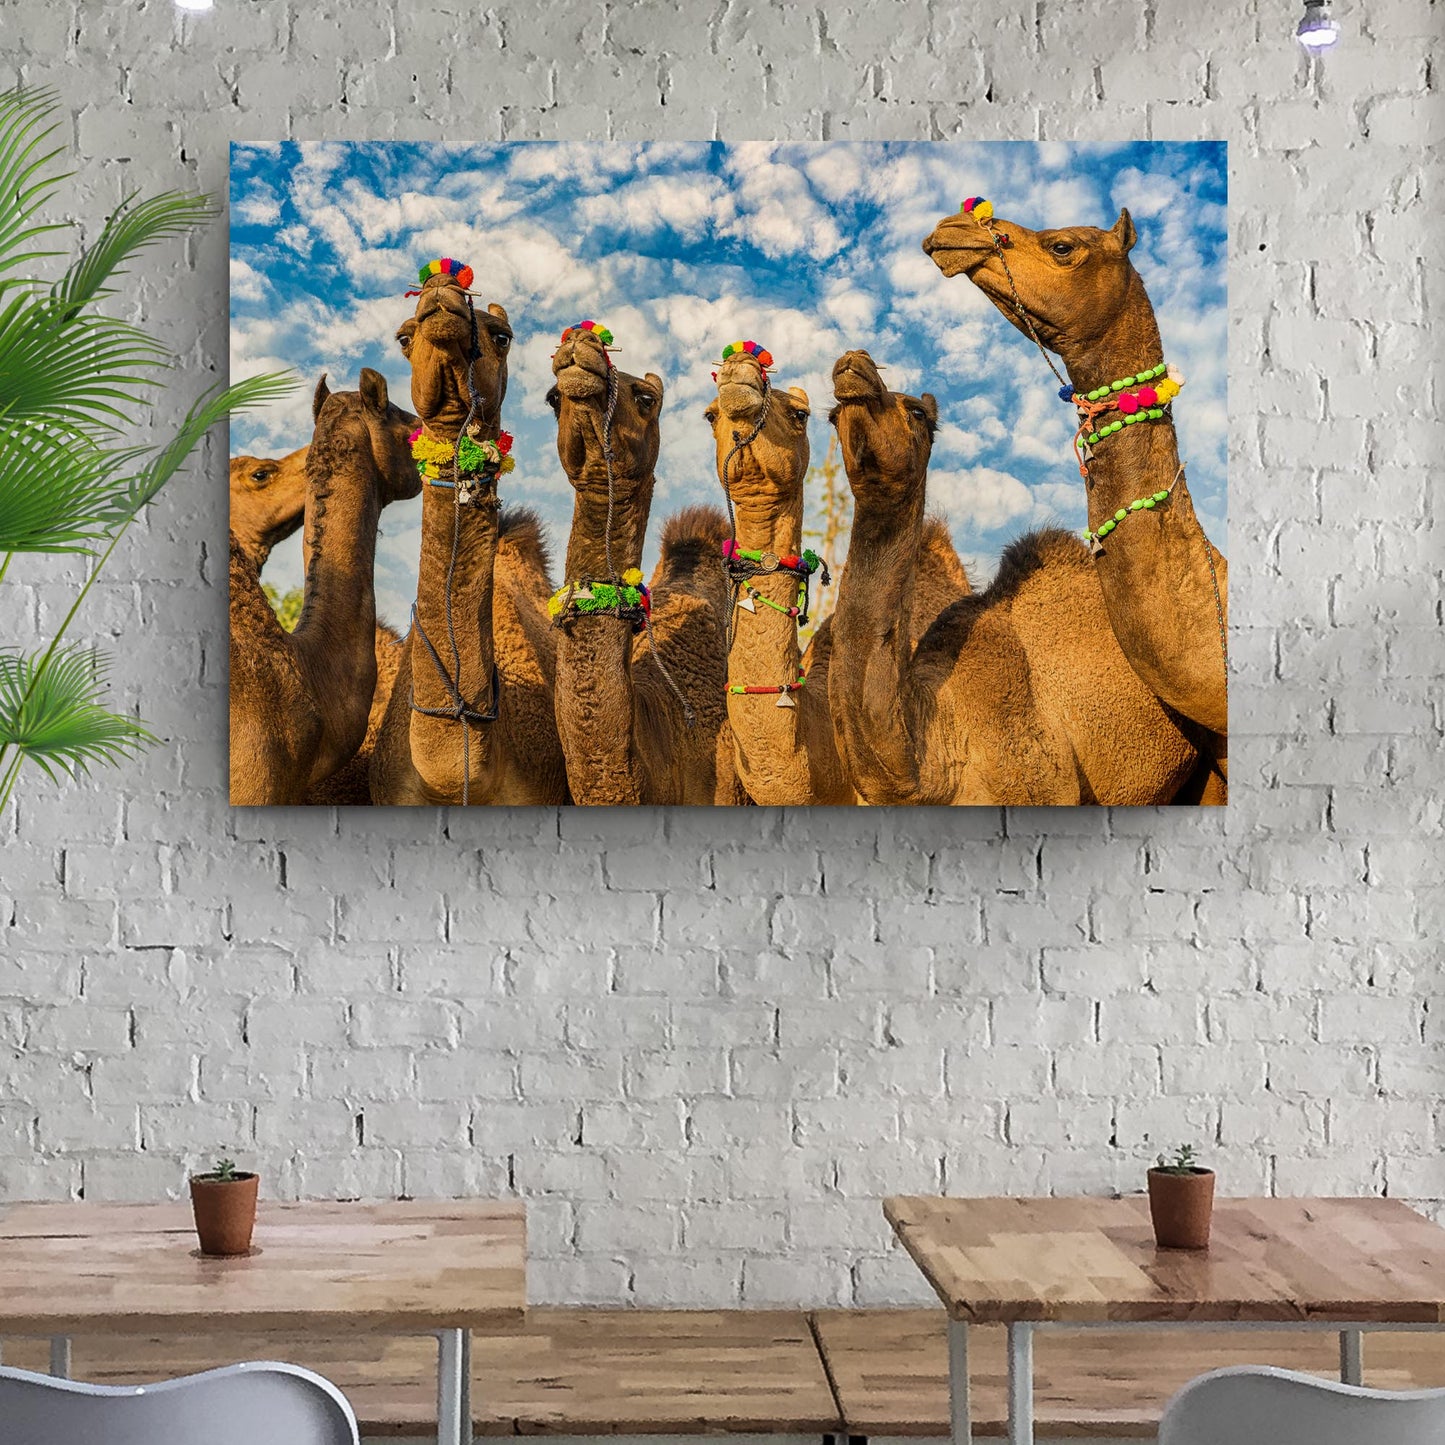 Pushkar Fair Camels Canvas Wall Art - Image by Tailored Canvases